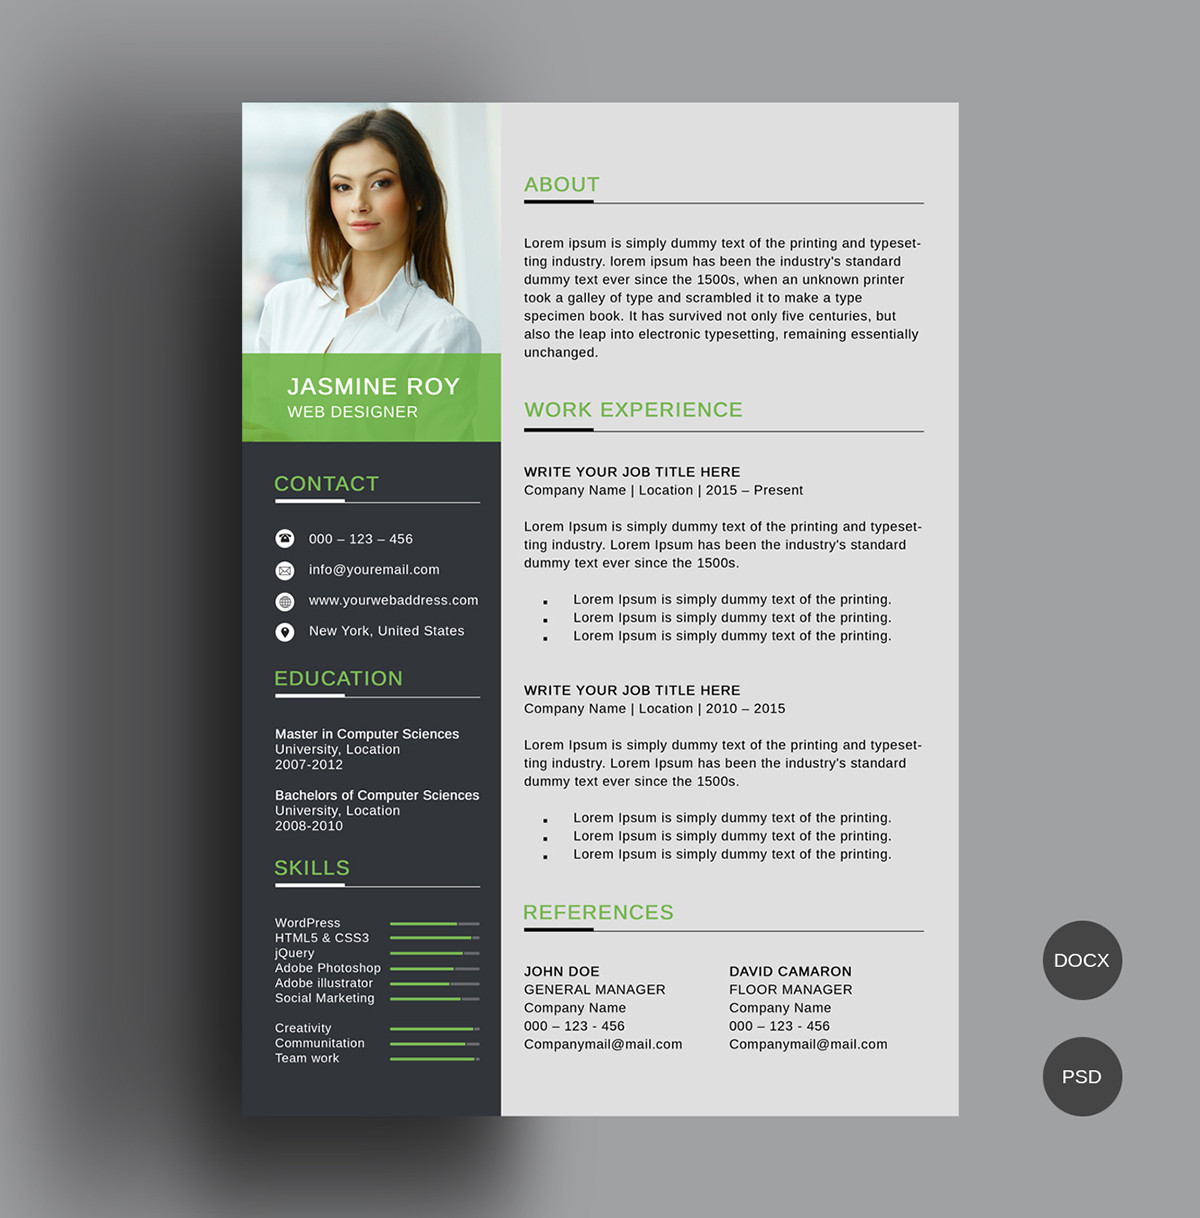 Resume with Picture Template Free Download Free Clean Cv/resume Template On Behance